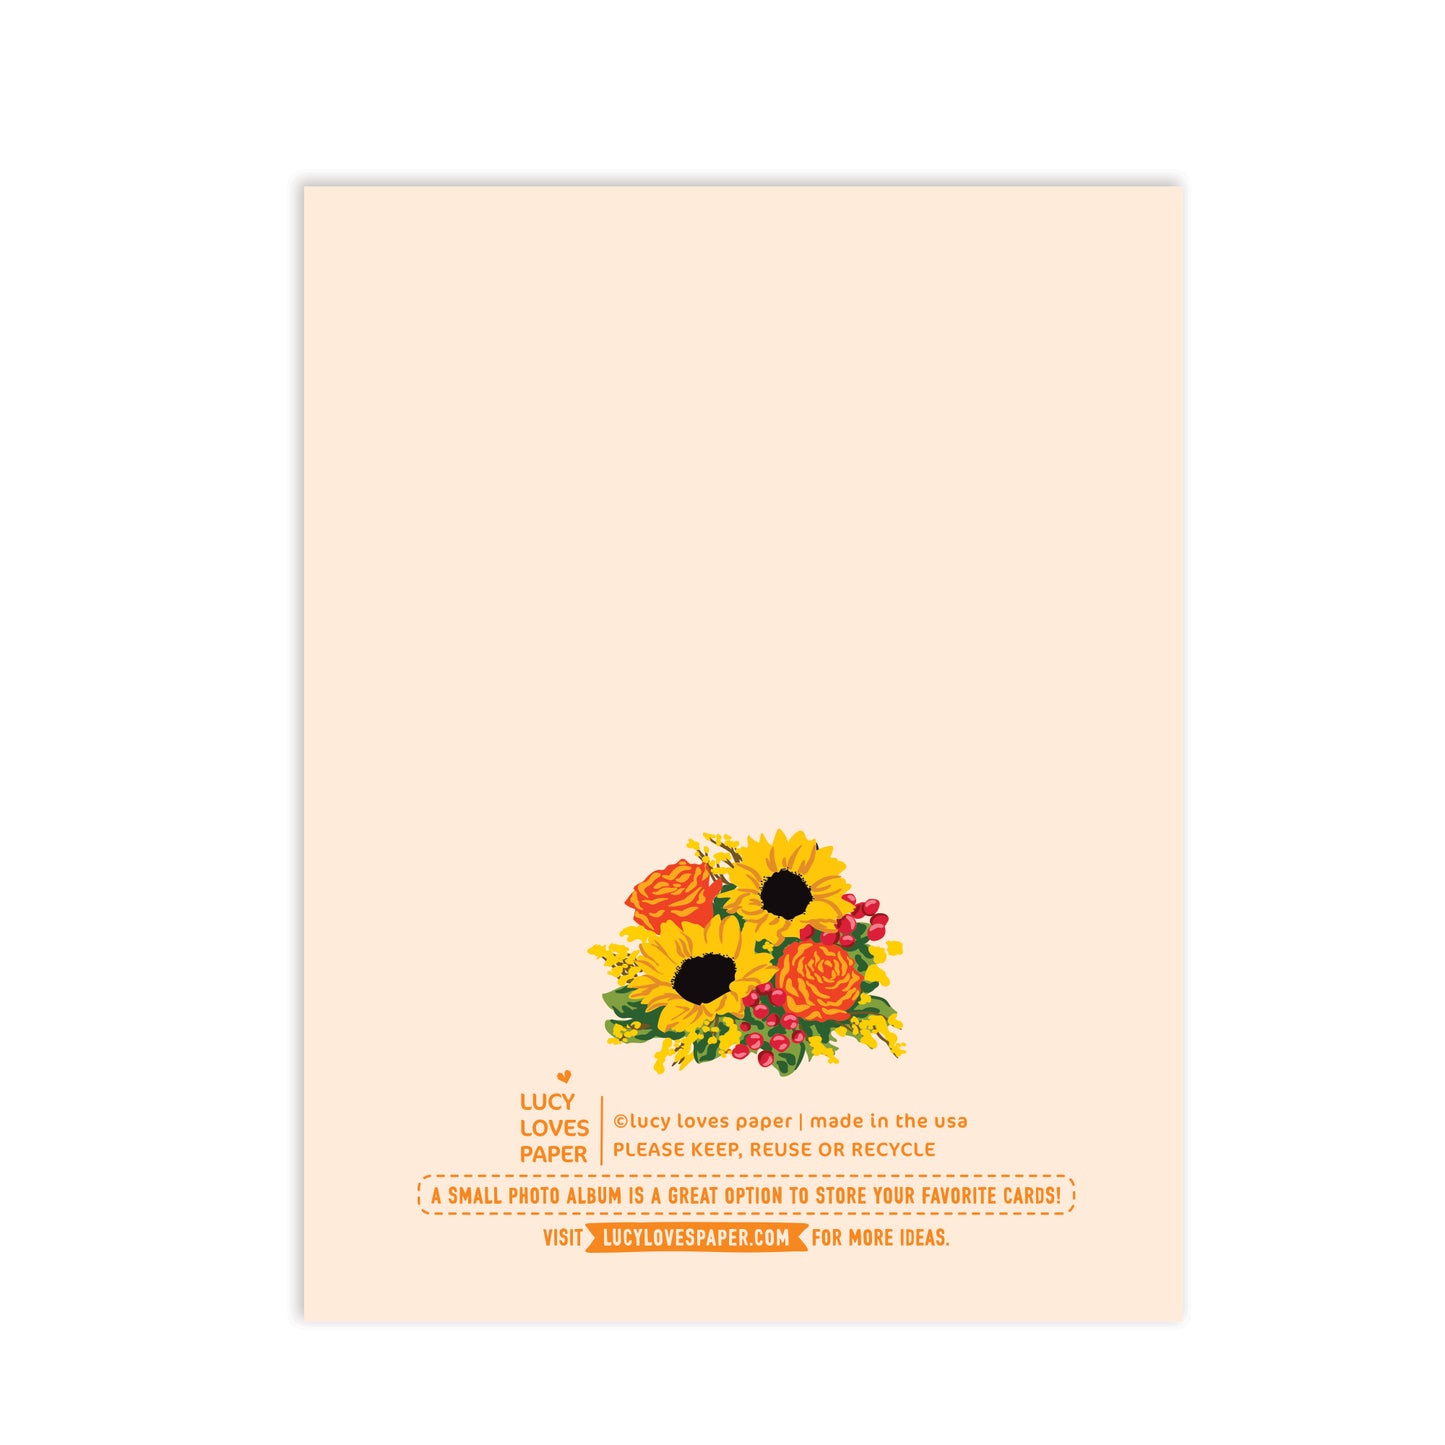 SO THANKFUL FOR YOU - FALL CARD